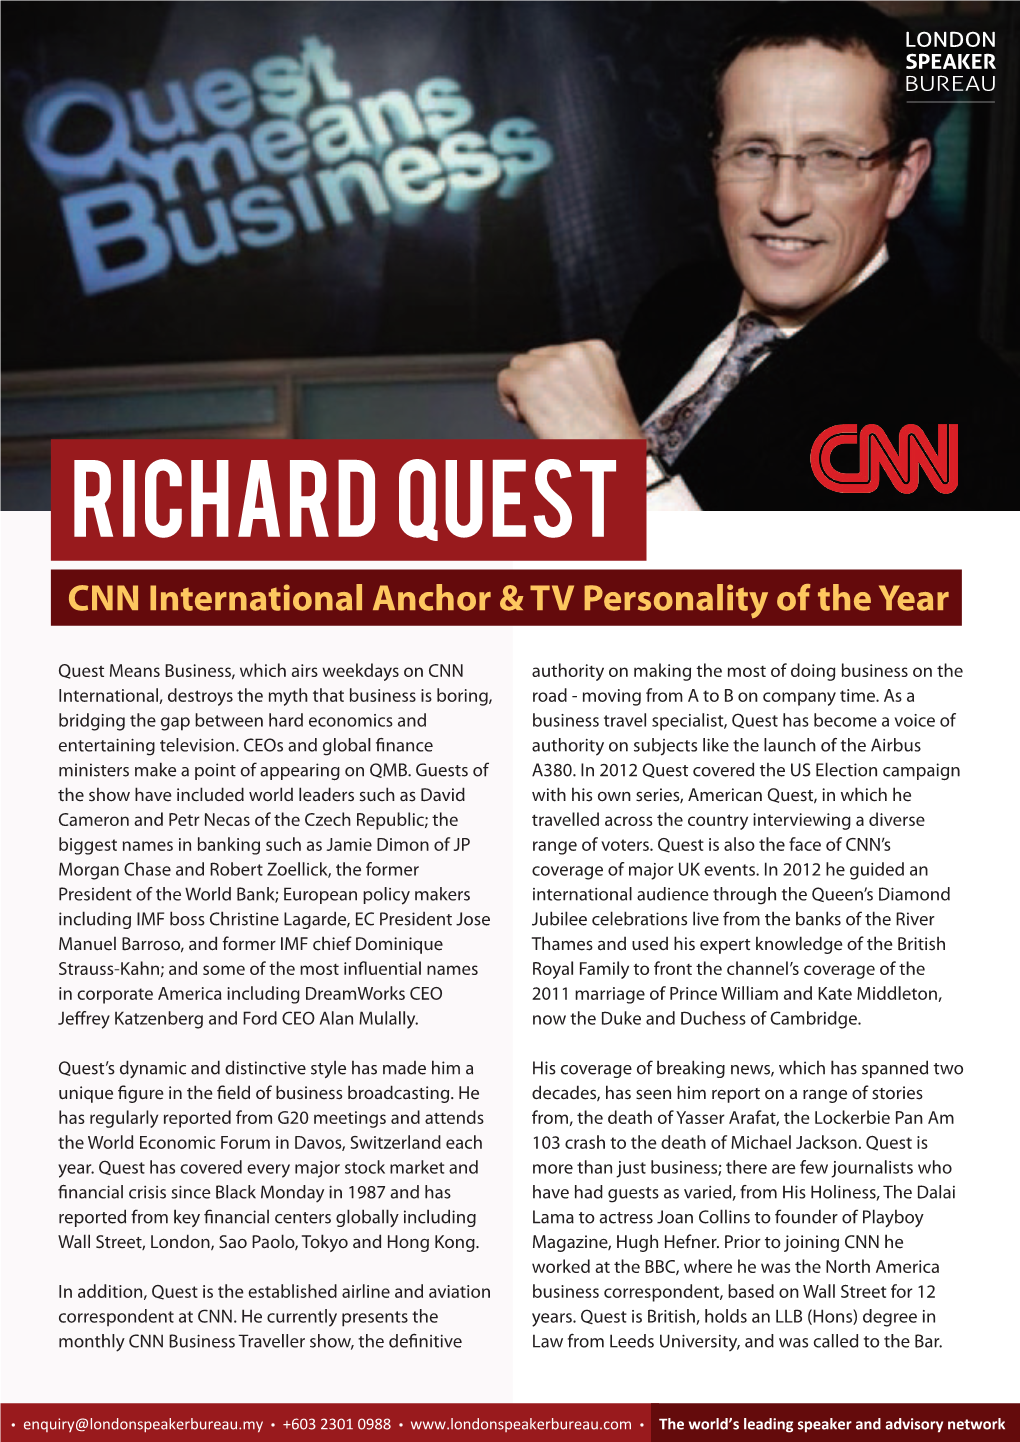 RICHARD QUEST CNN International Anchor & TV Personality of the Year